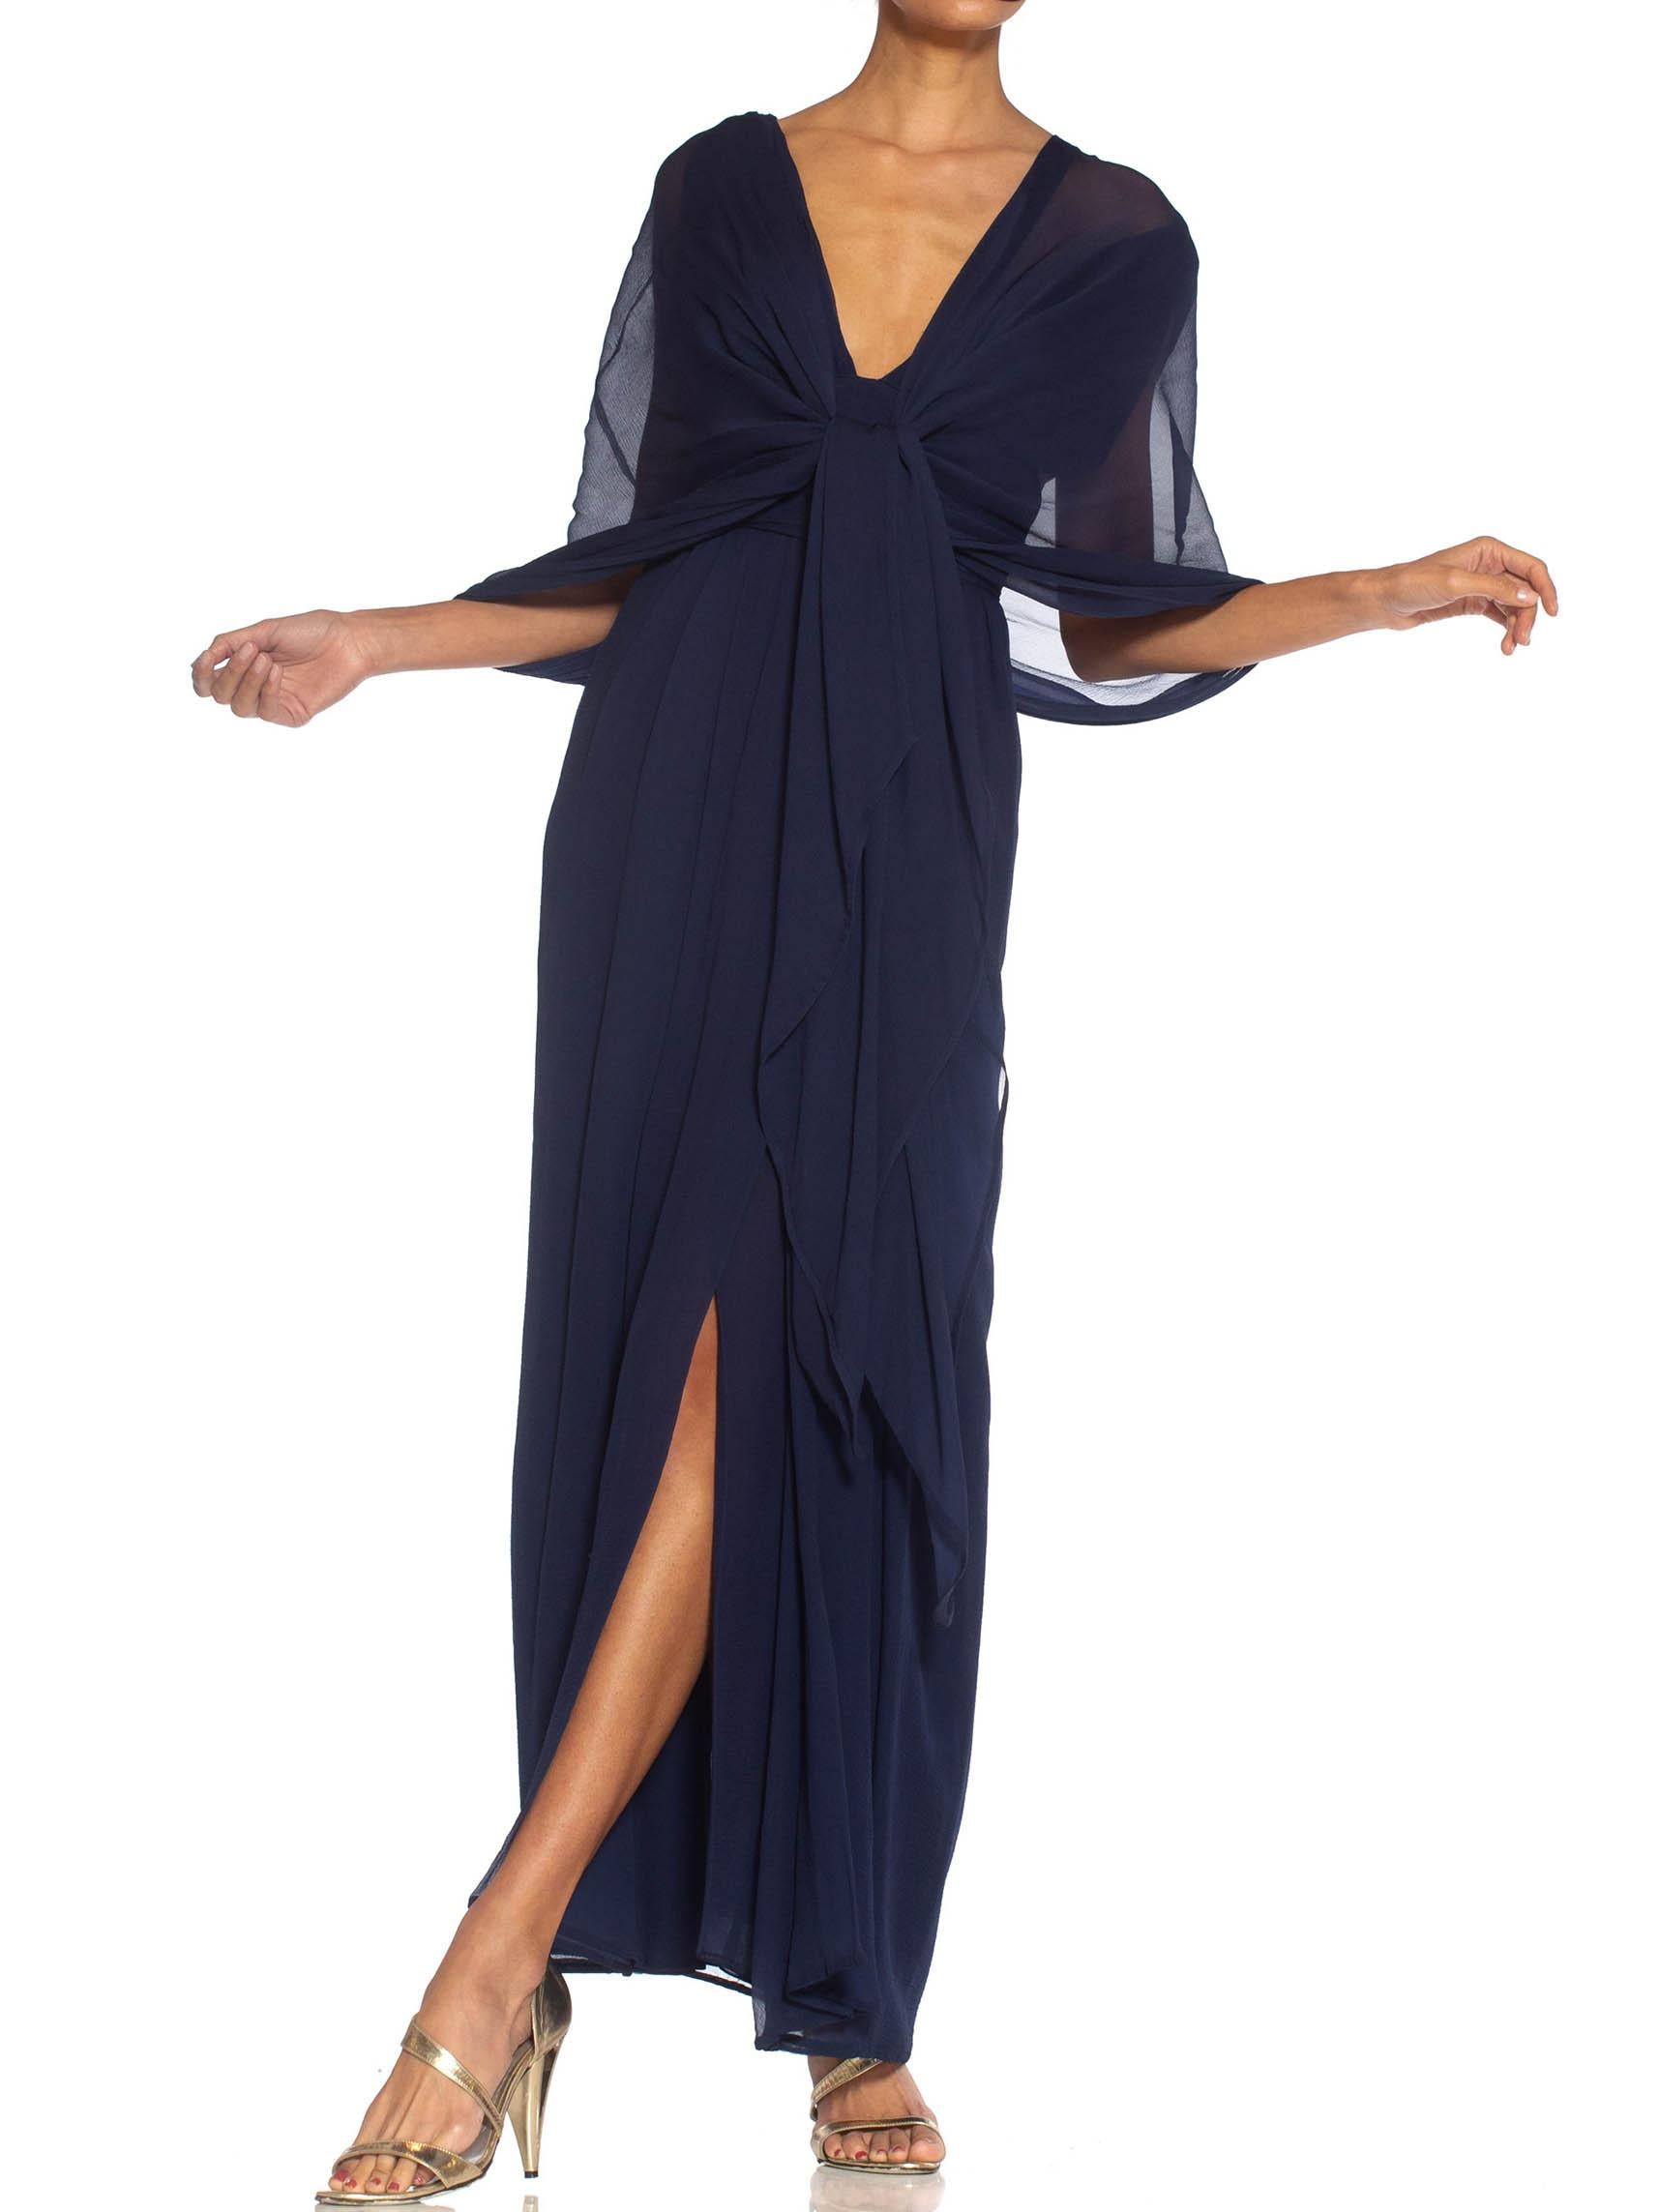 1980S GIVENCHY Navy Blue Haute Couture Silk Chiffon Low Cut Gown 1989 In Excellent Condition For Sale In New York, NY